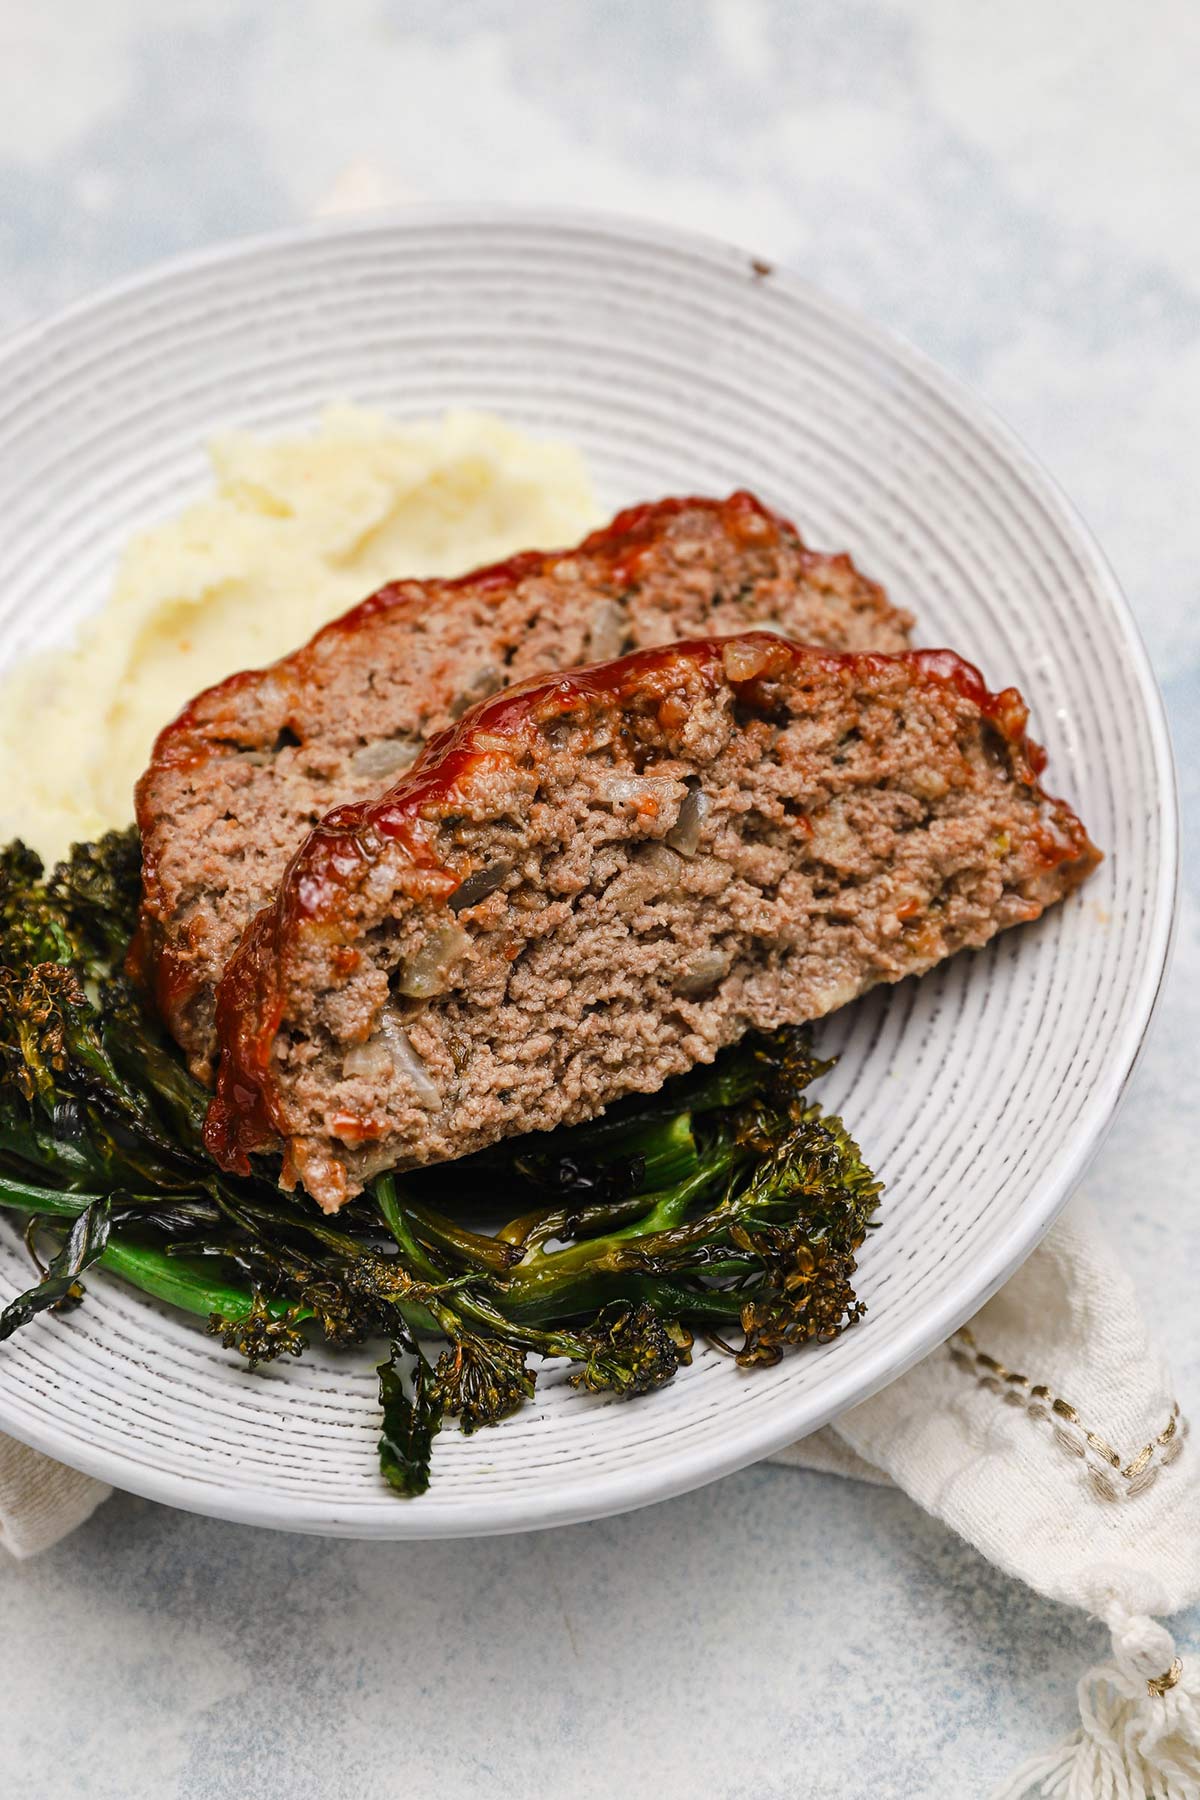 2 slices of meatloaf on a white plate with roasted broccoli and mashed potatoes.